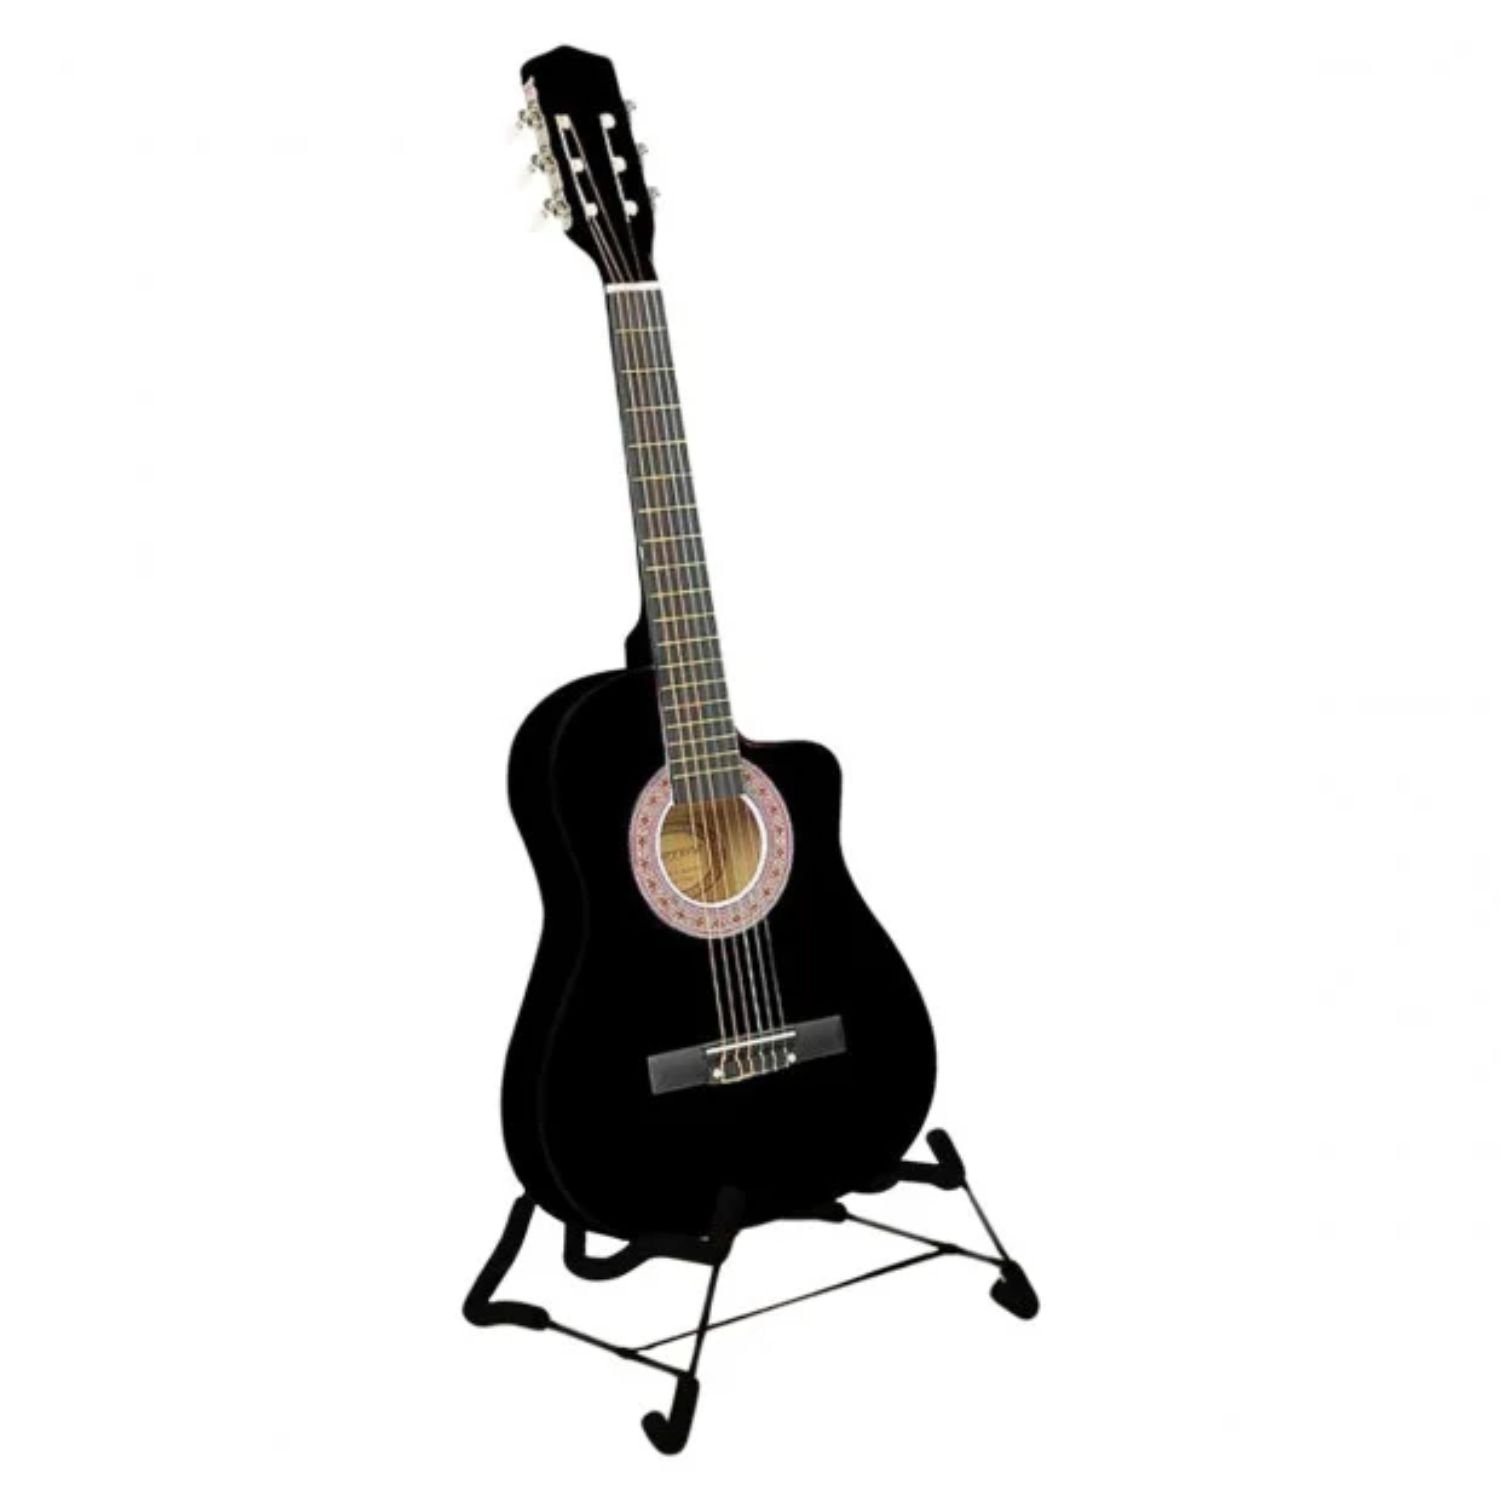 Karrera 38in Pro Cutaway Acoustic Guitar with Carry Bag - Black 2